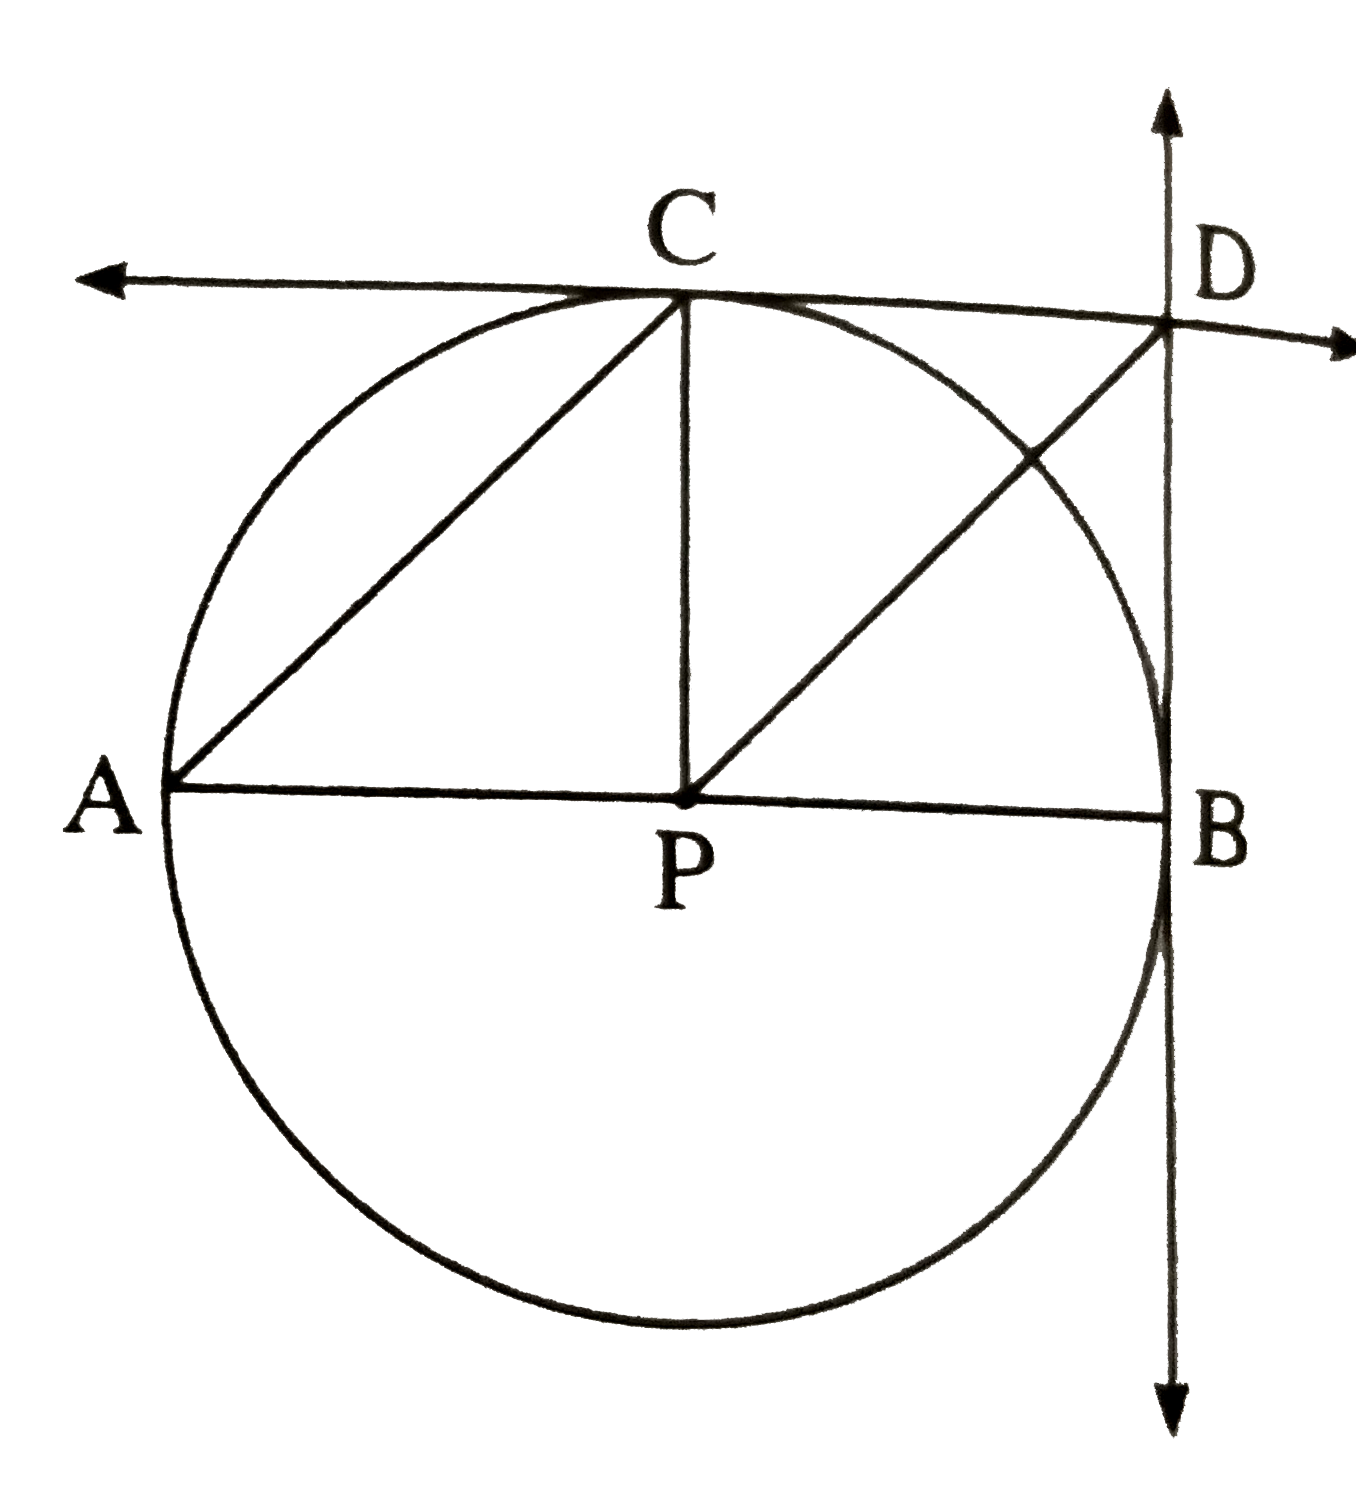 Seg AB is a diameter of a circle with centre P. Seg AC is a chord. A secant through P and parallel to seg AC intersects the tangent drawn at C in D. Prove that line DB is a tangent to the circle.